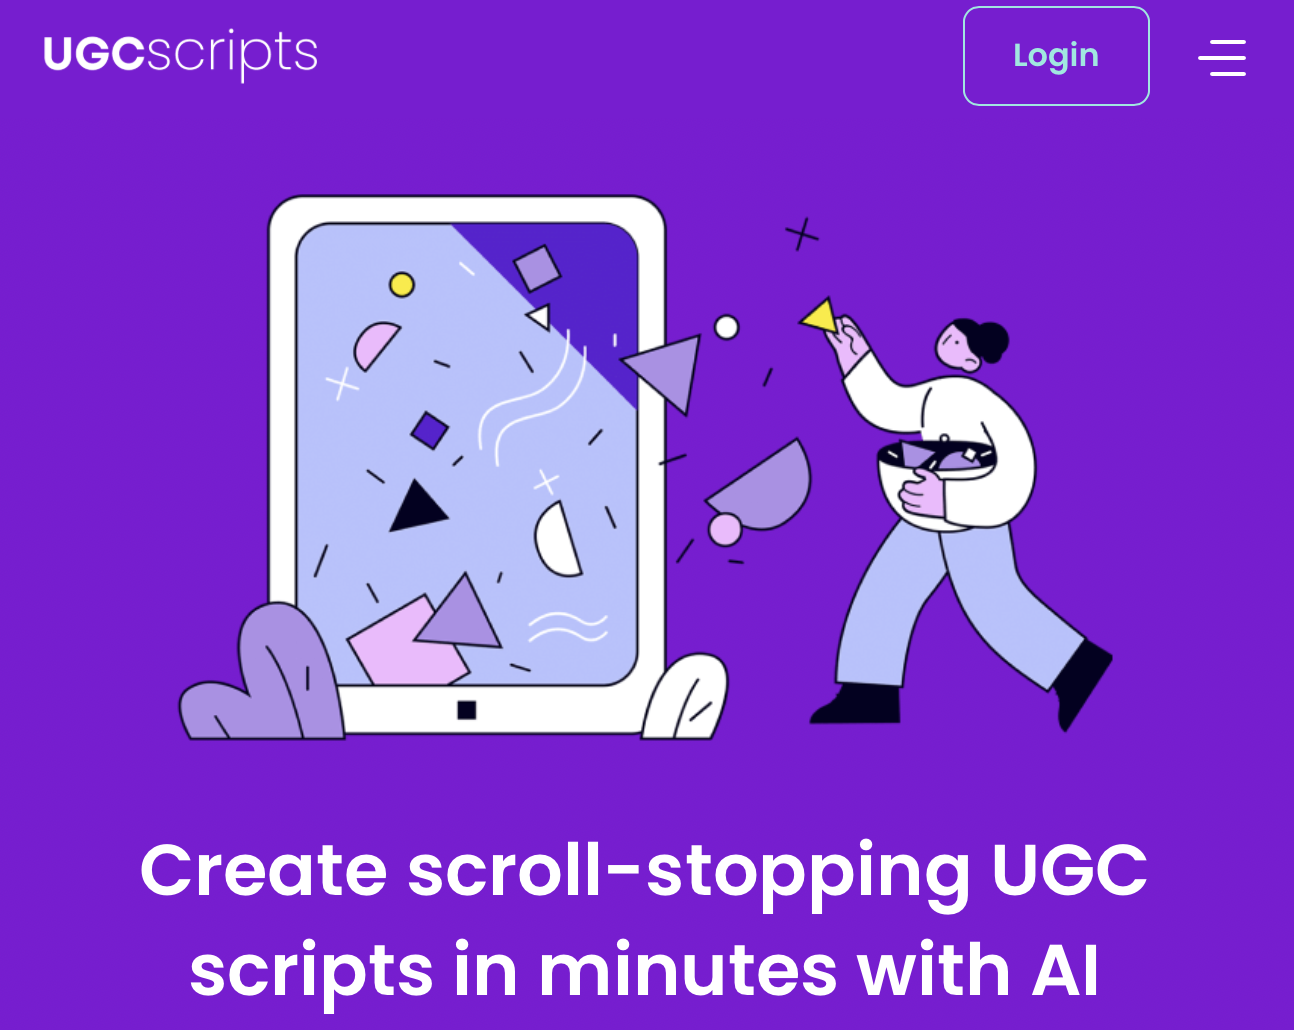 UGC Scripts - A tool for copywriting and content creation with your audience data